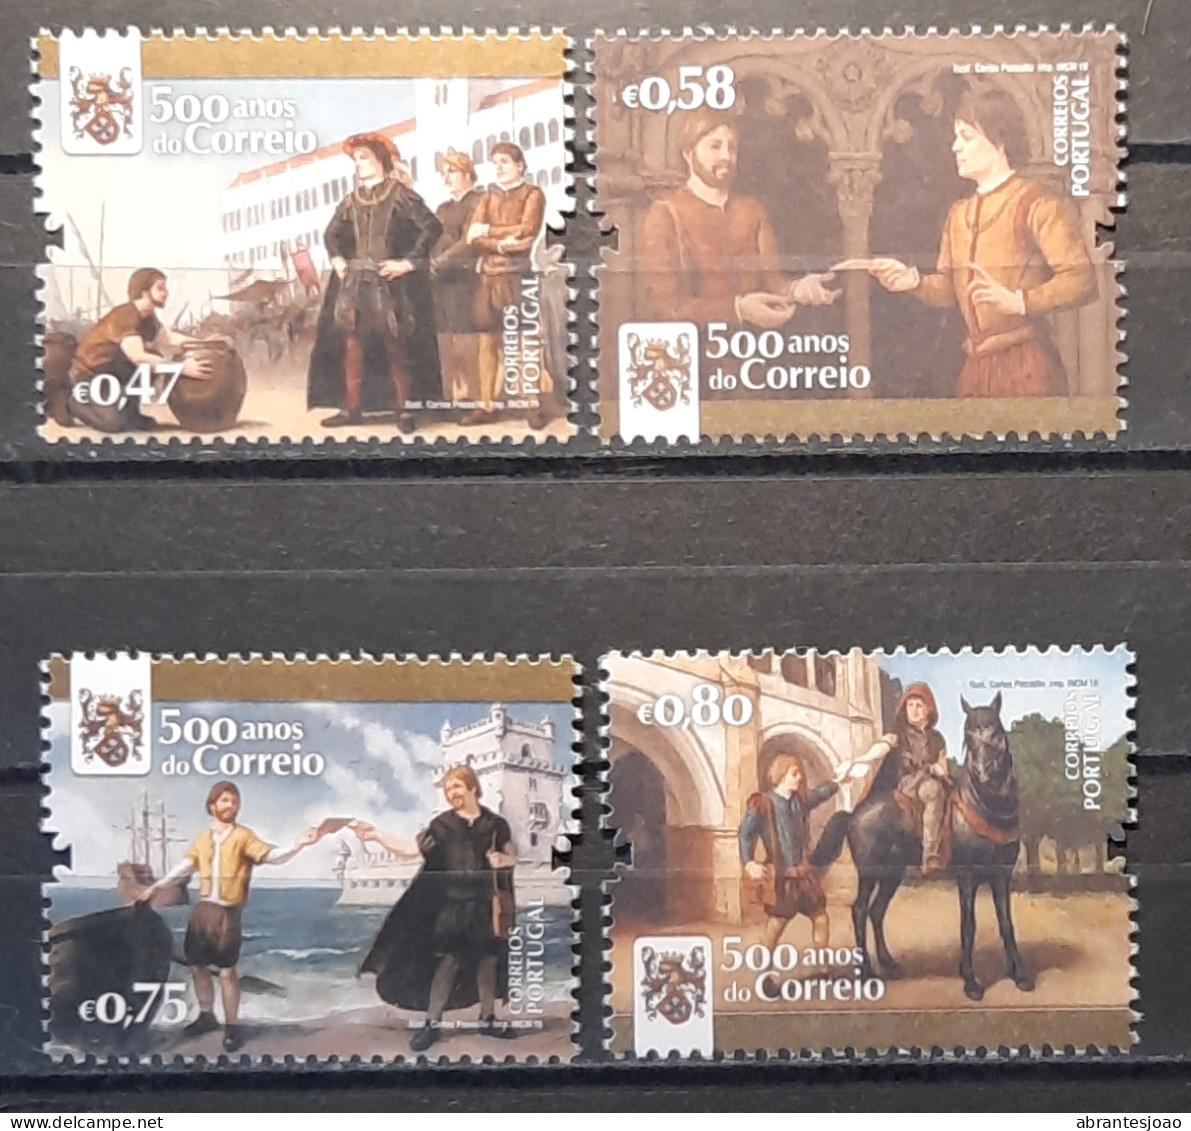 2016 - Portugal - MNH - 500 Years Of Mail In Portugal - 1st Group - 4 Stamps + Souvenir Sheet Of 1 Stamp - Nuovi